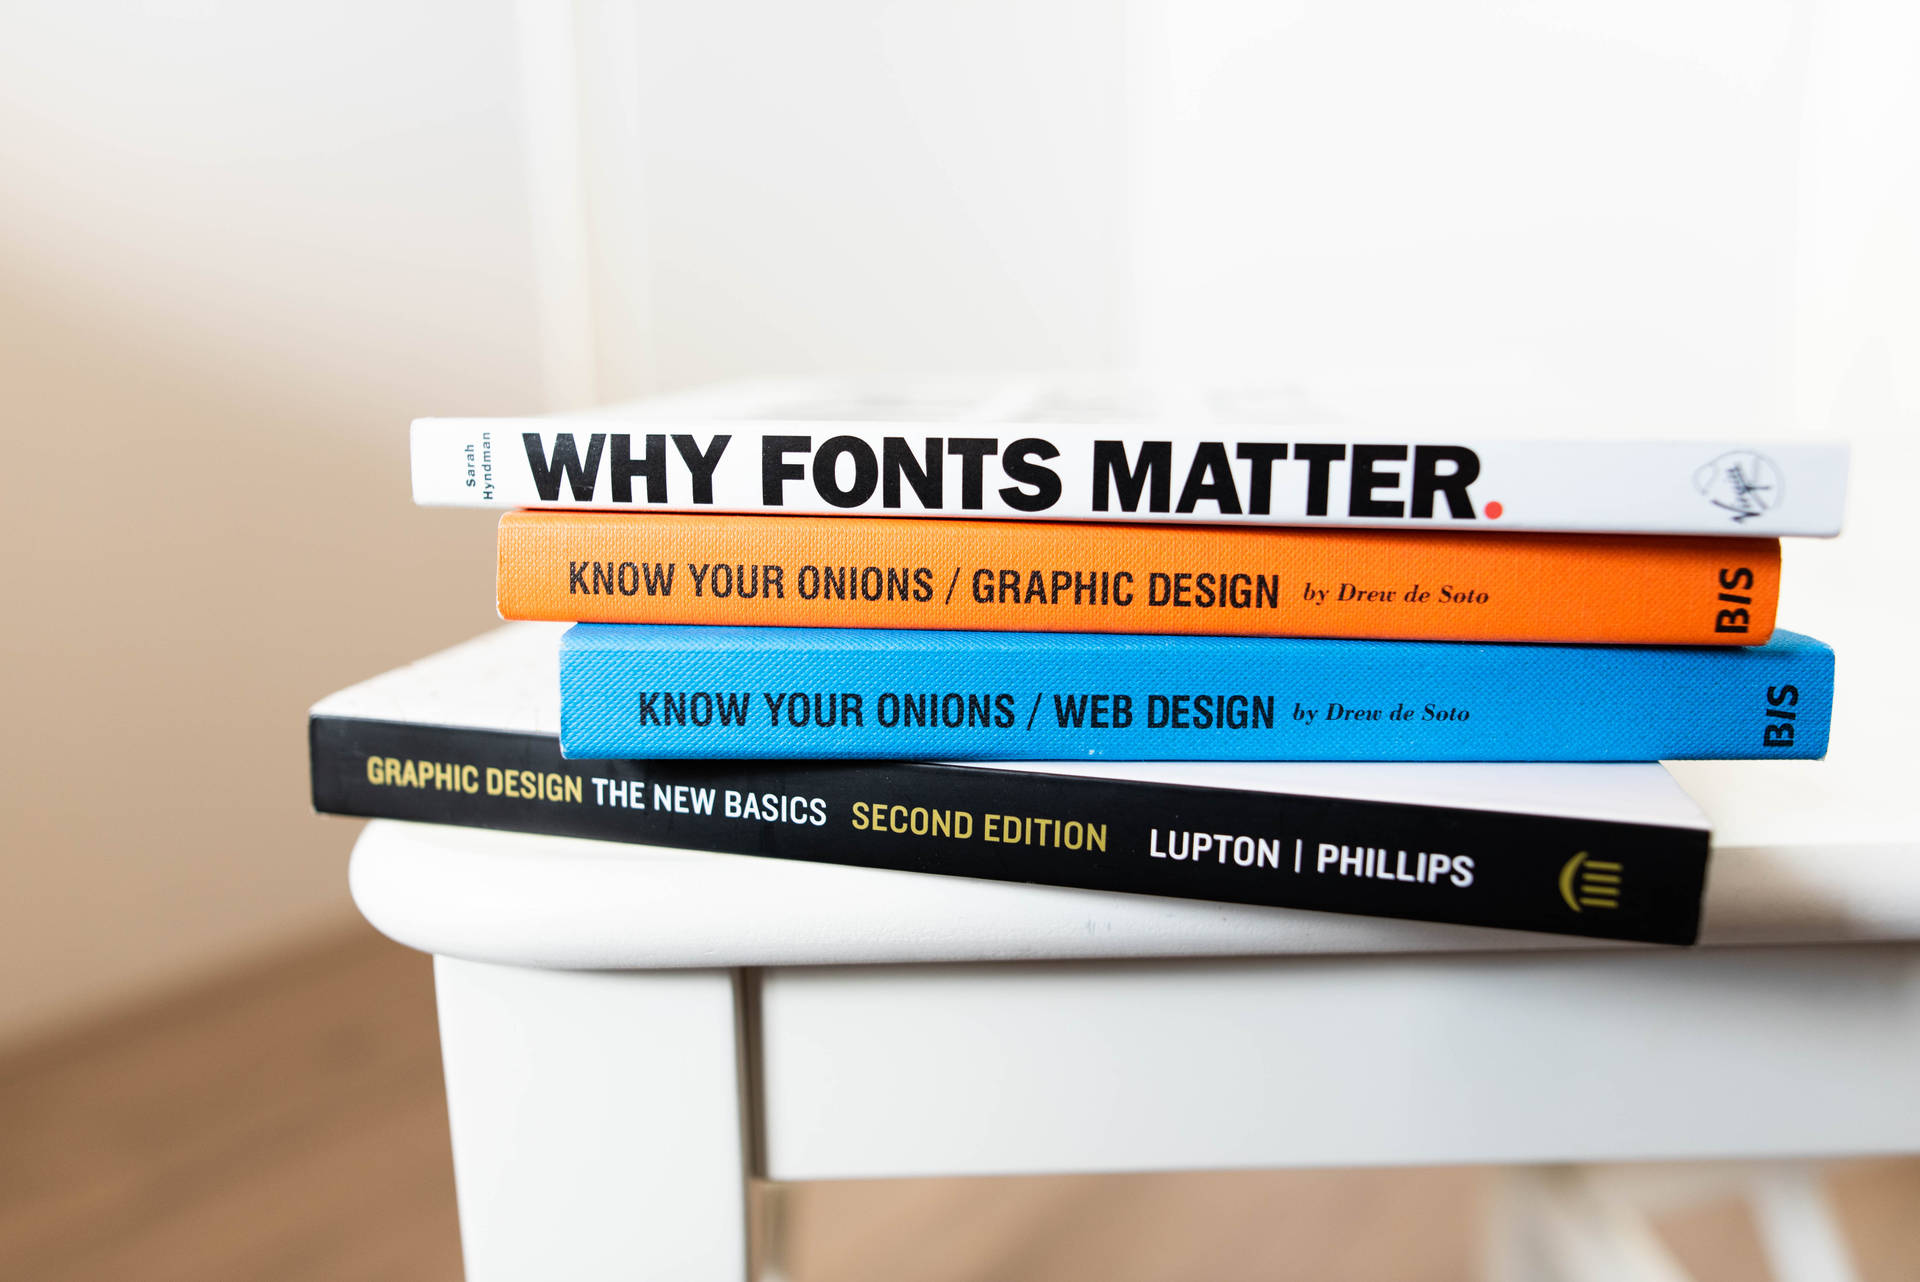 Why Fonts Matter Book Stack Background